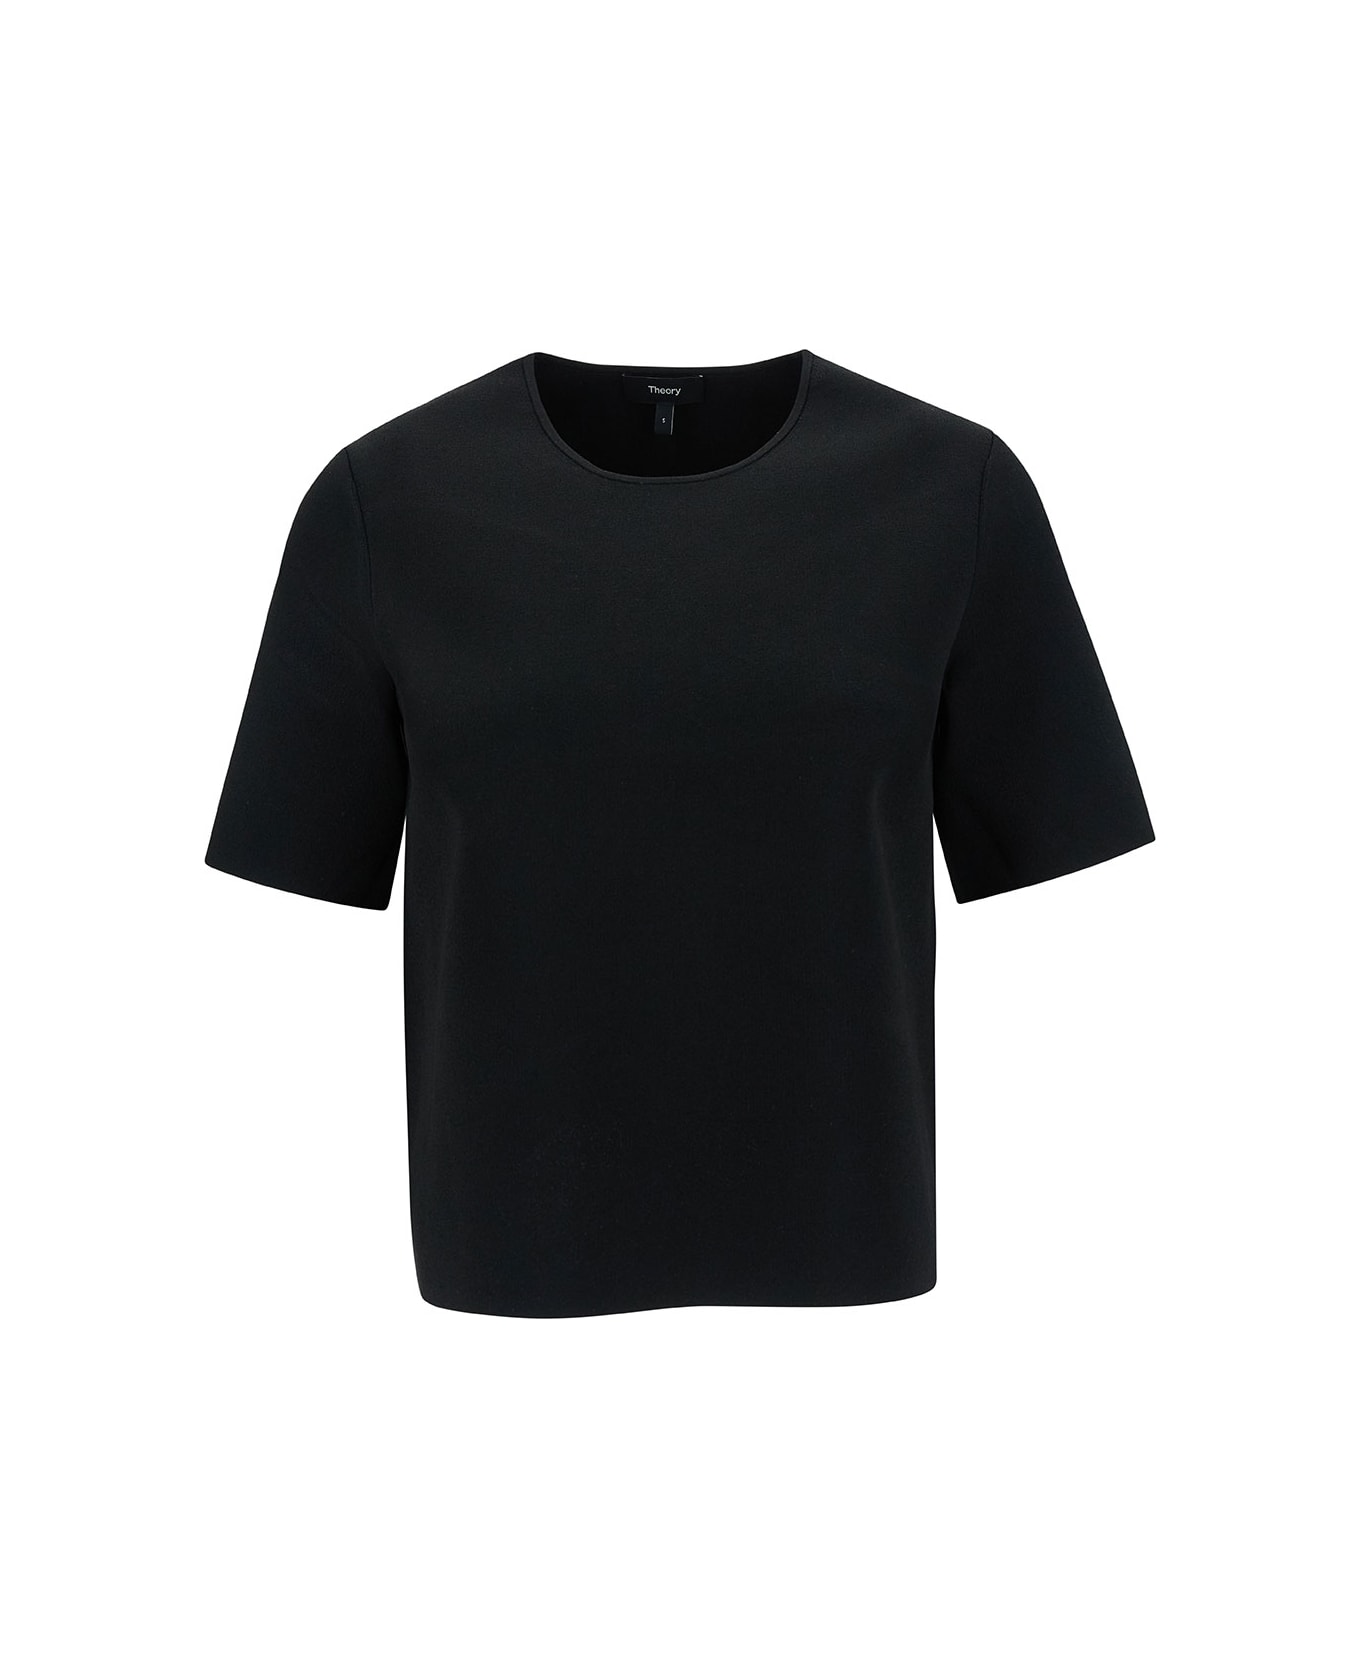 Theory Black T-shirt With U Neckline In Viscose Blend Woman - Black Tシャツ